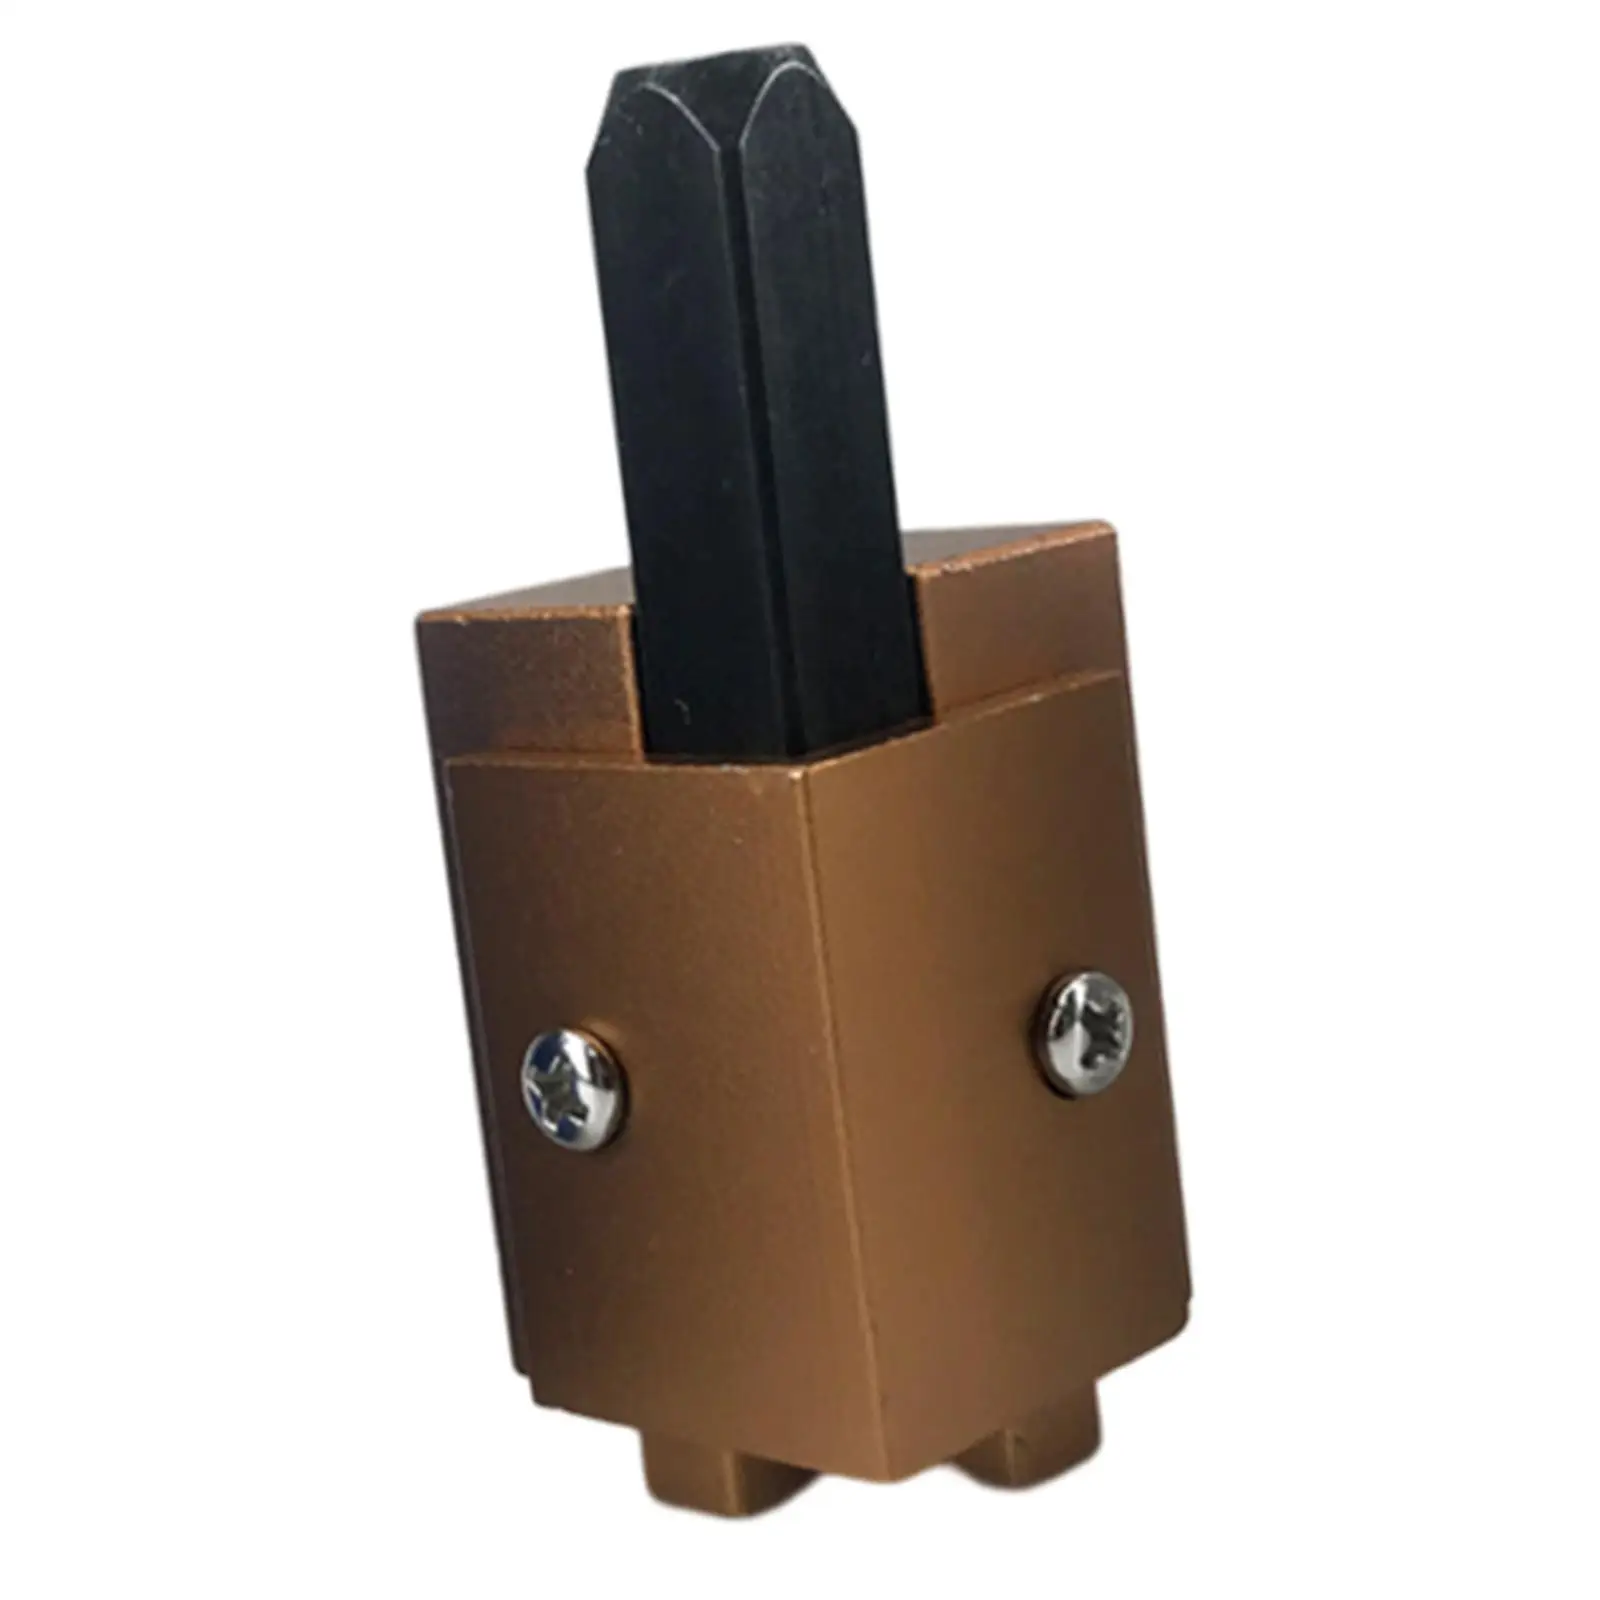 Corner Chisels Hinge Recess Squaring Corner Chisels for Woodworking Framing Mortising Right Angle Woodworking Door Lock Recesses